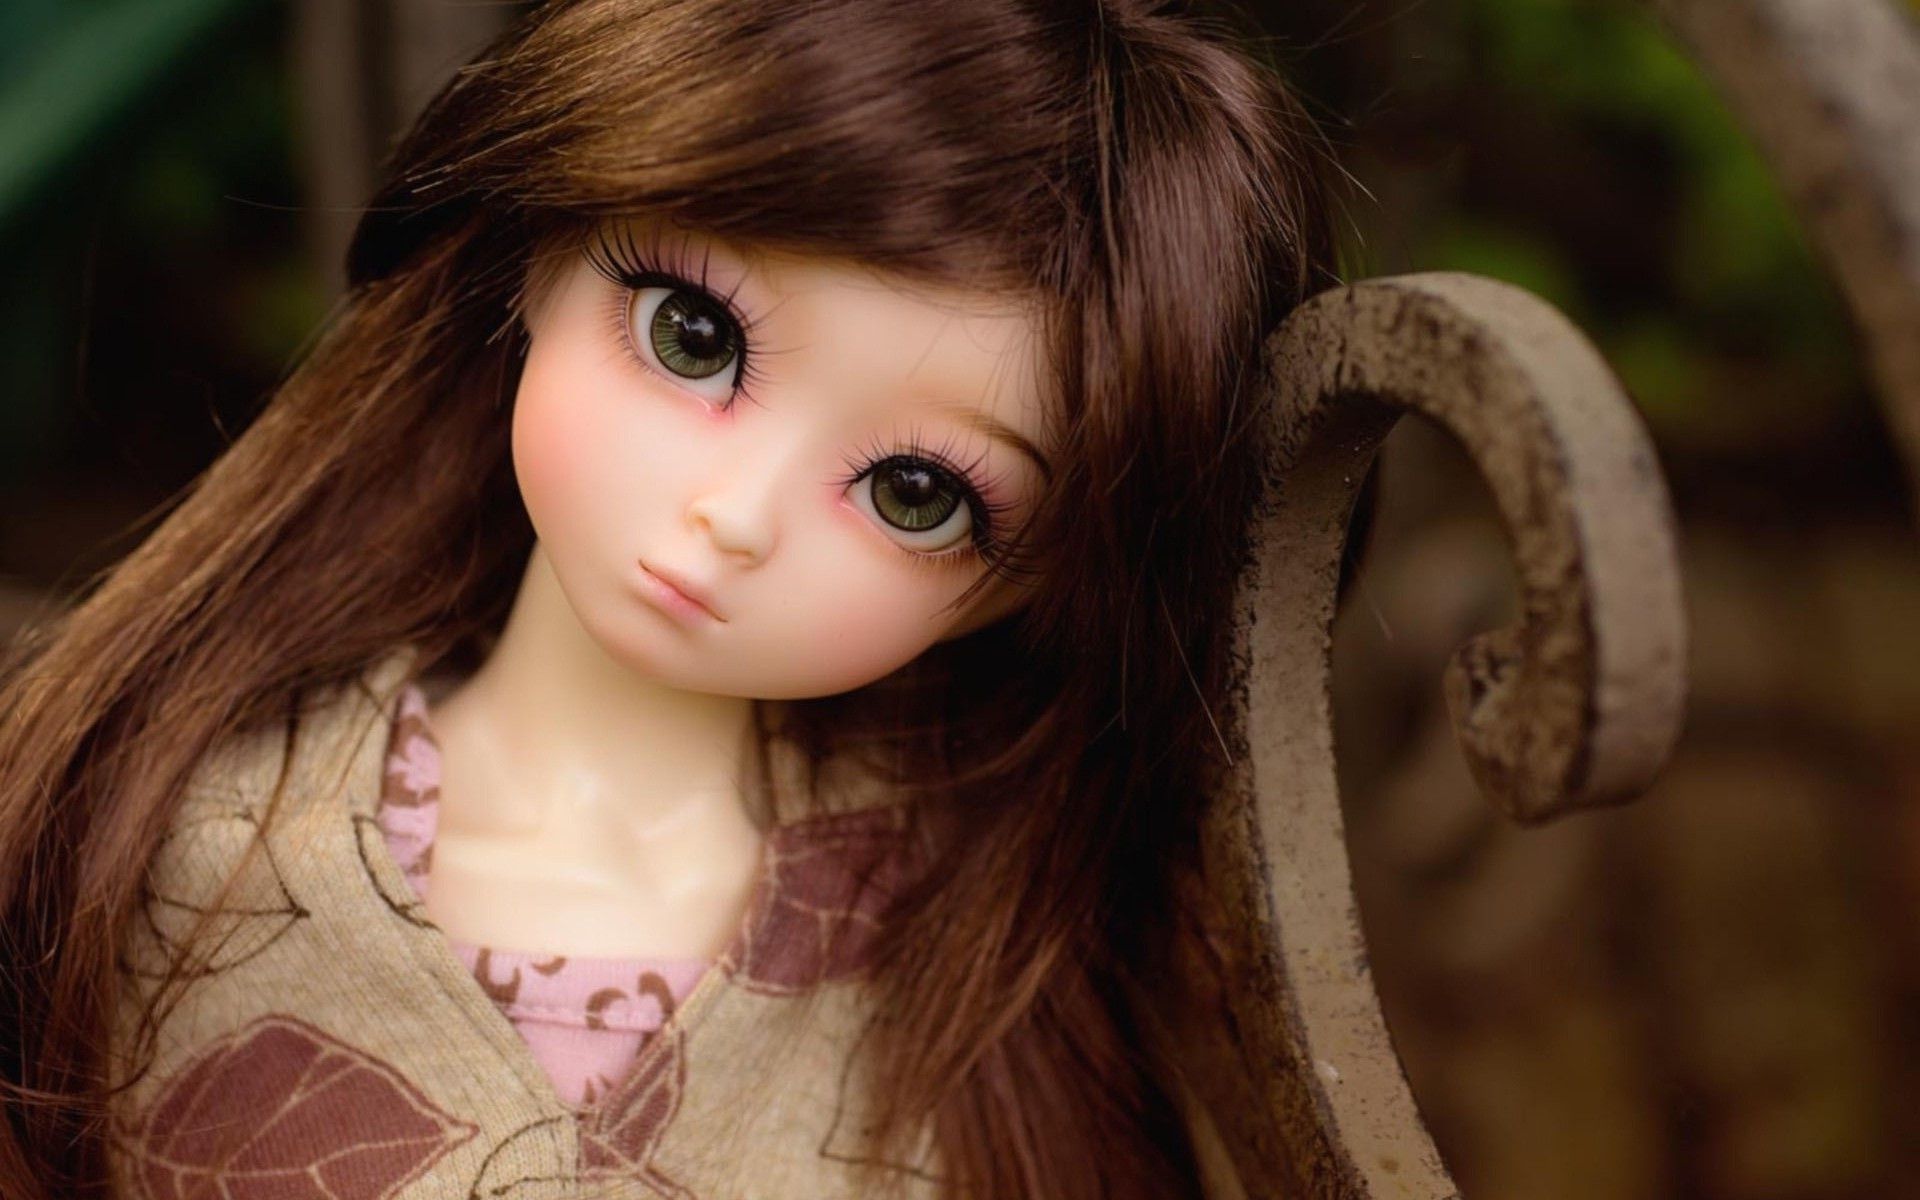 Very Cute Dolls Wallpapers For Facebook - Hd Doll Photo Download , HD Wallpaper & Backgrounds